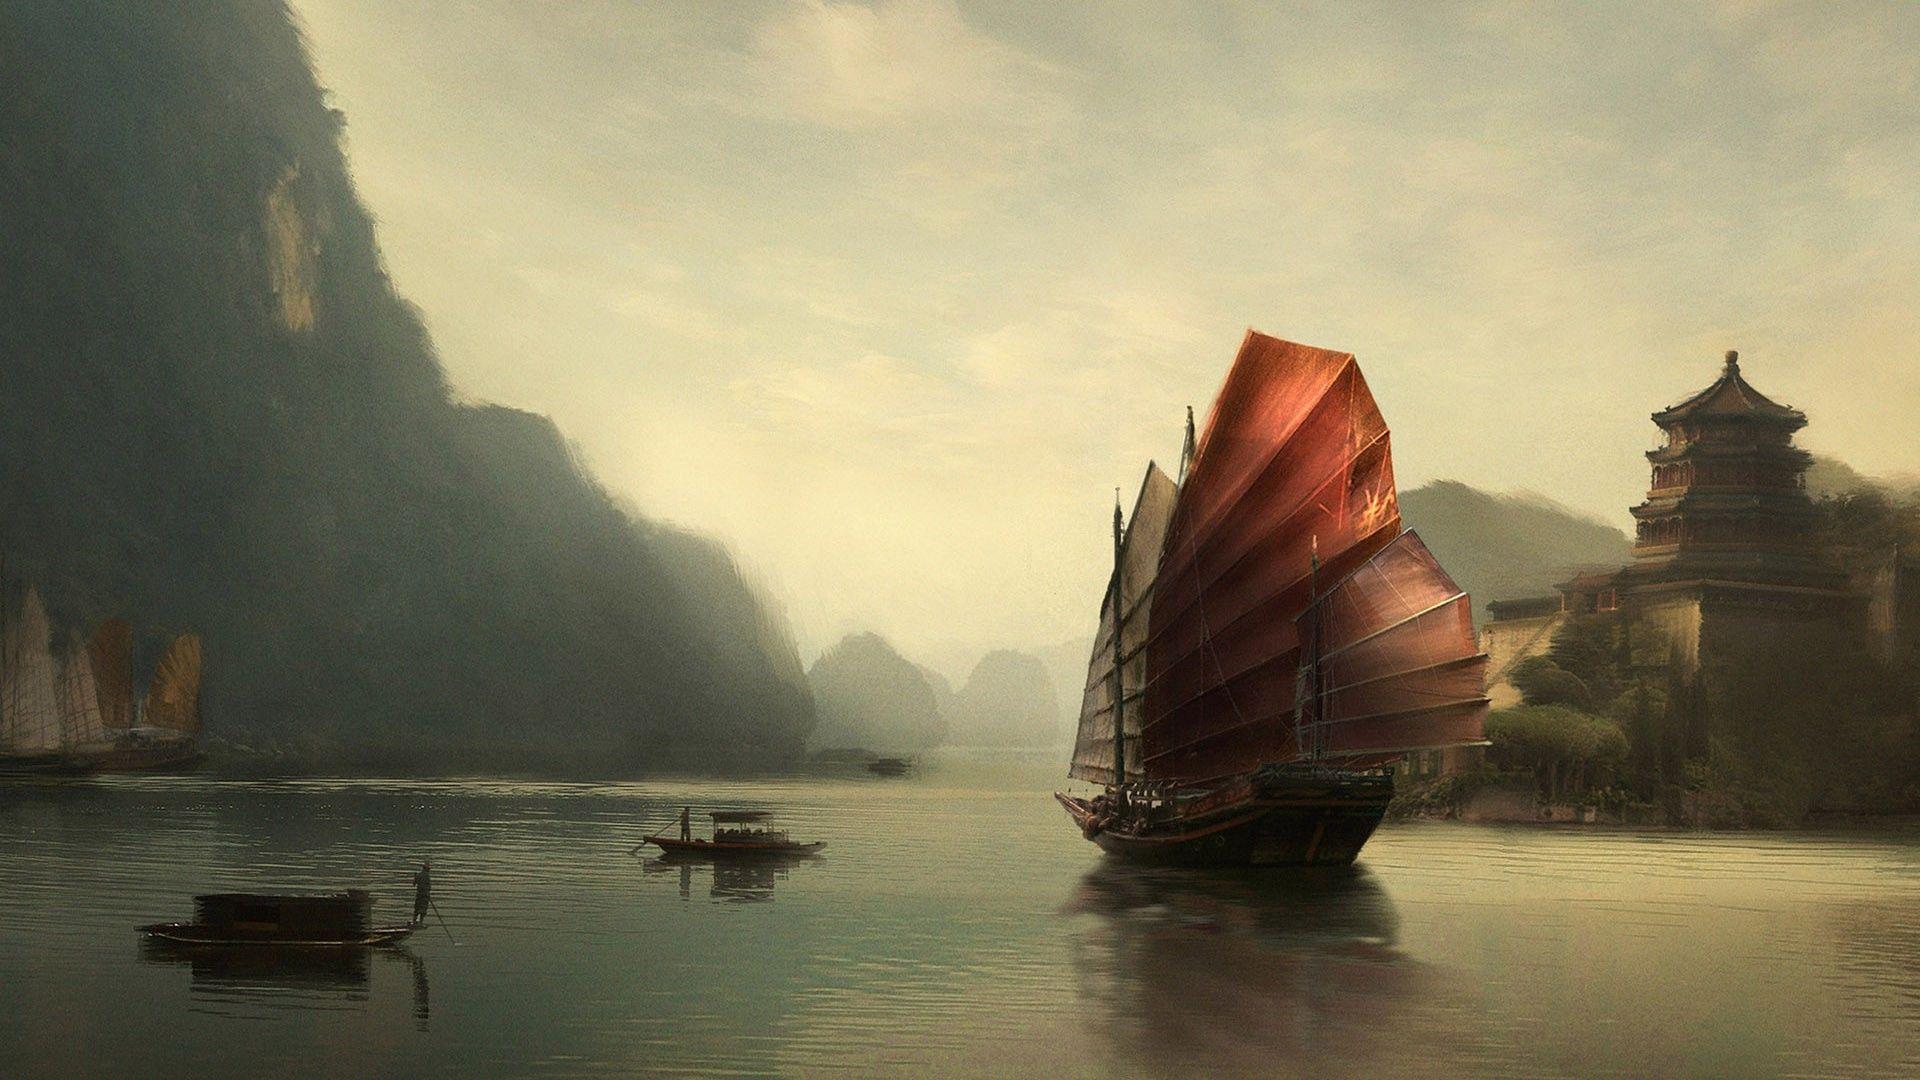 Chinese boat wallpaper. Art. Chinese boat, Boating